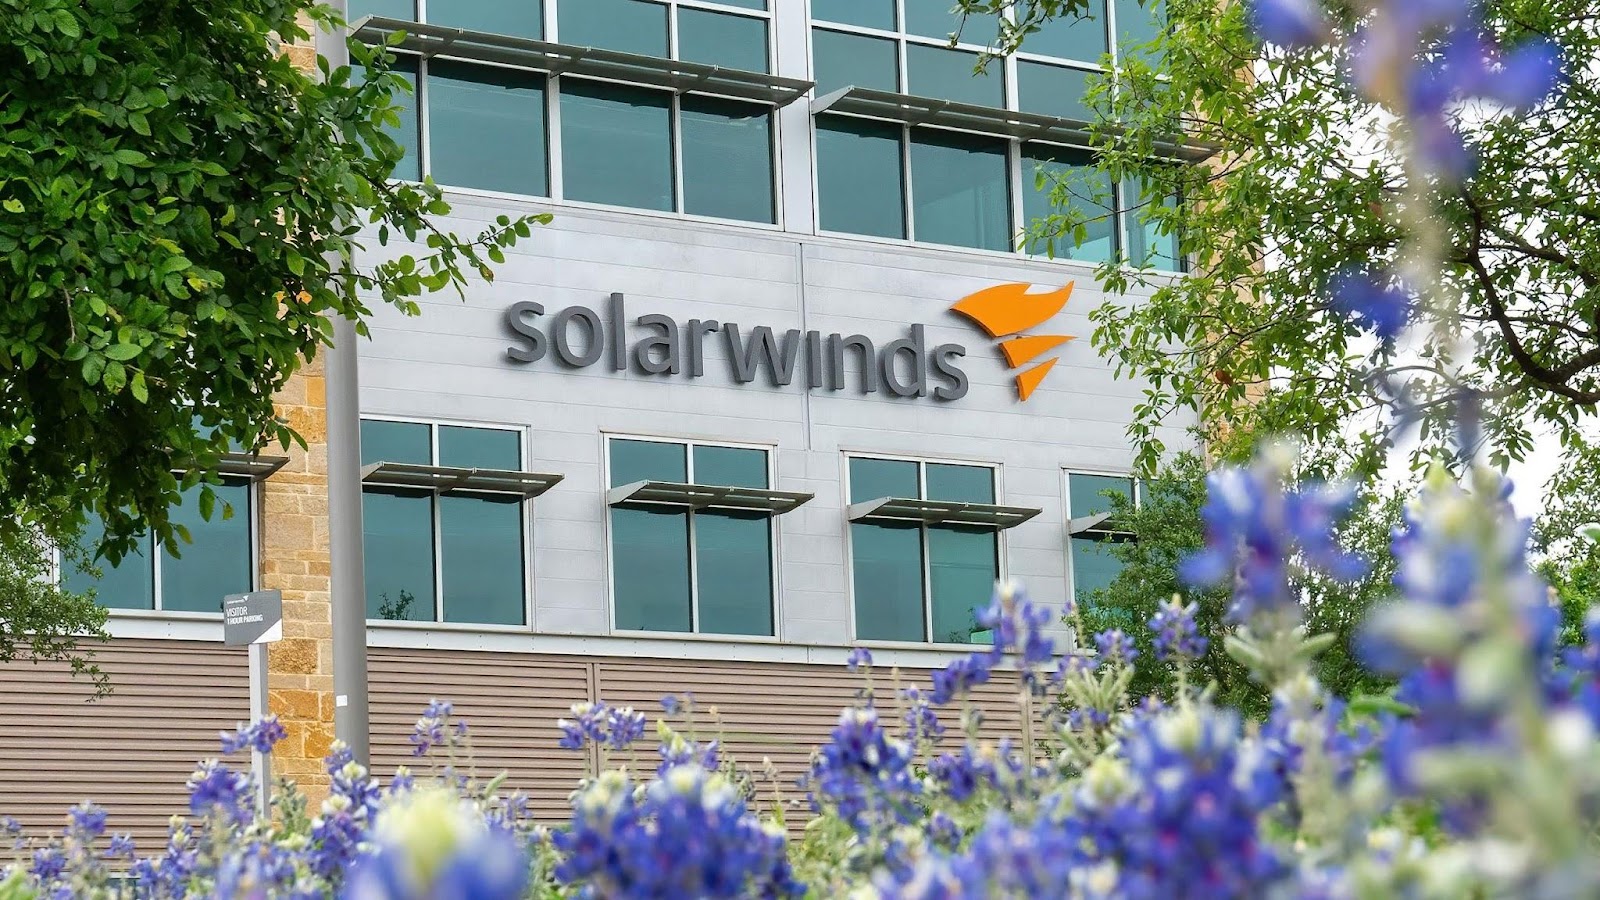 Solarwinds office building